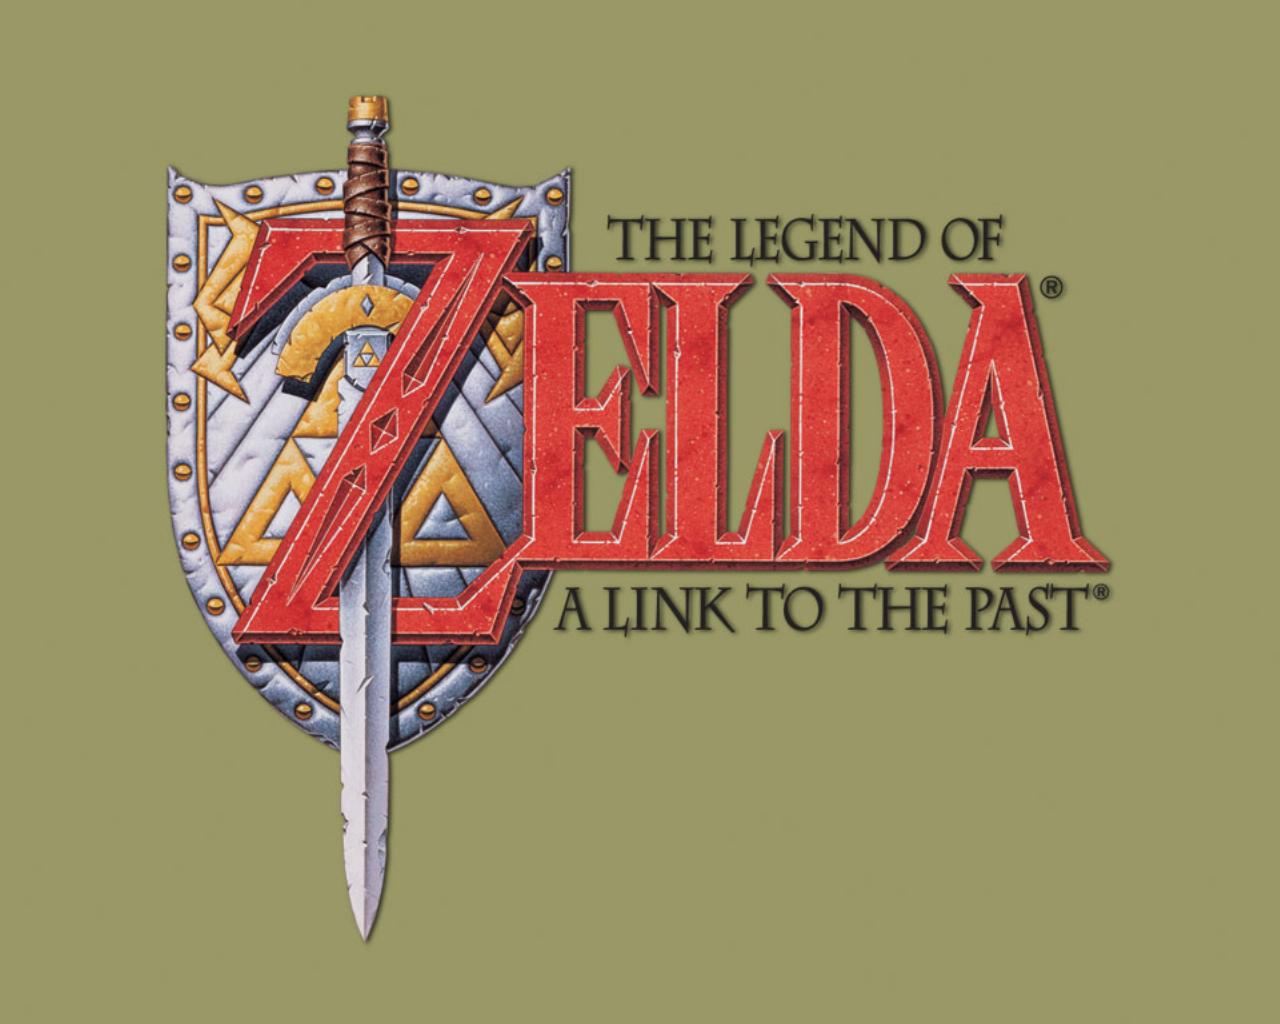 Link To The Past Wallpaper A